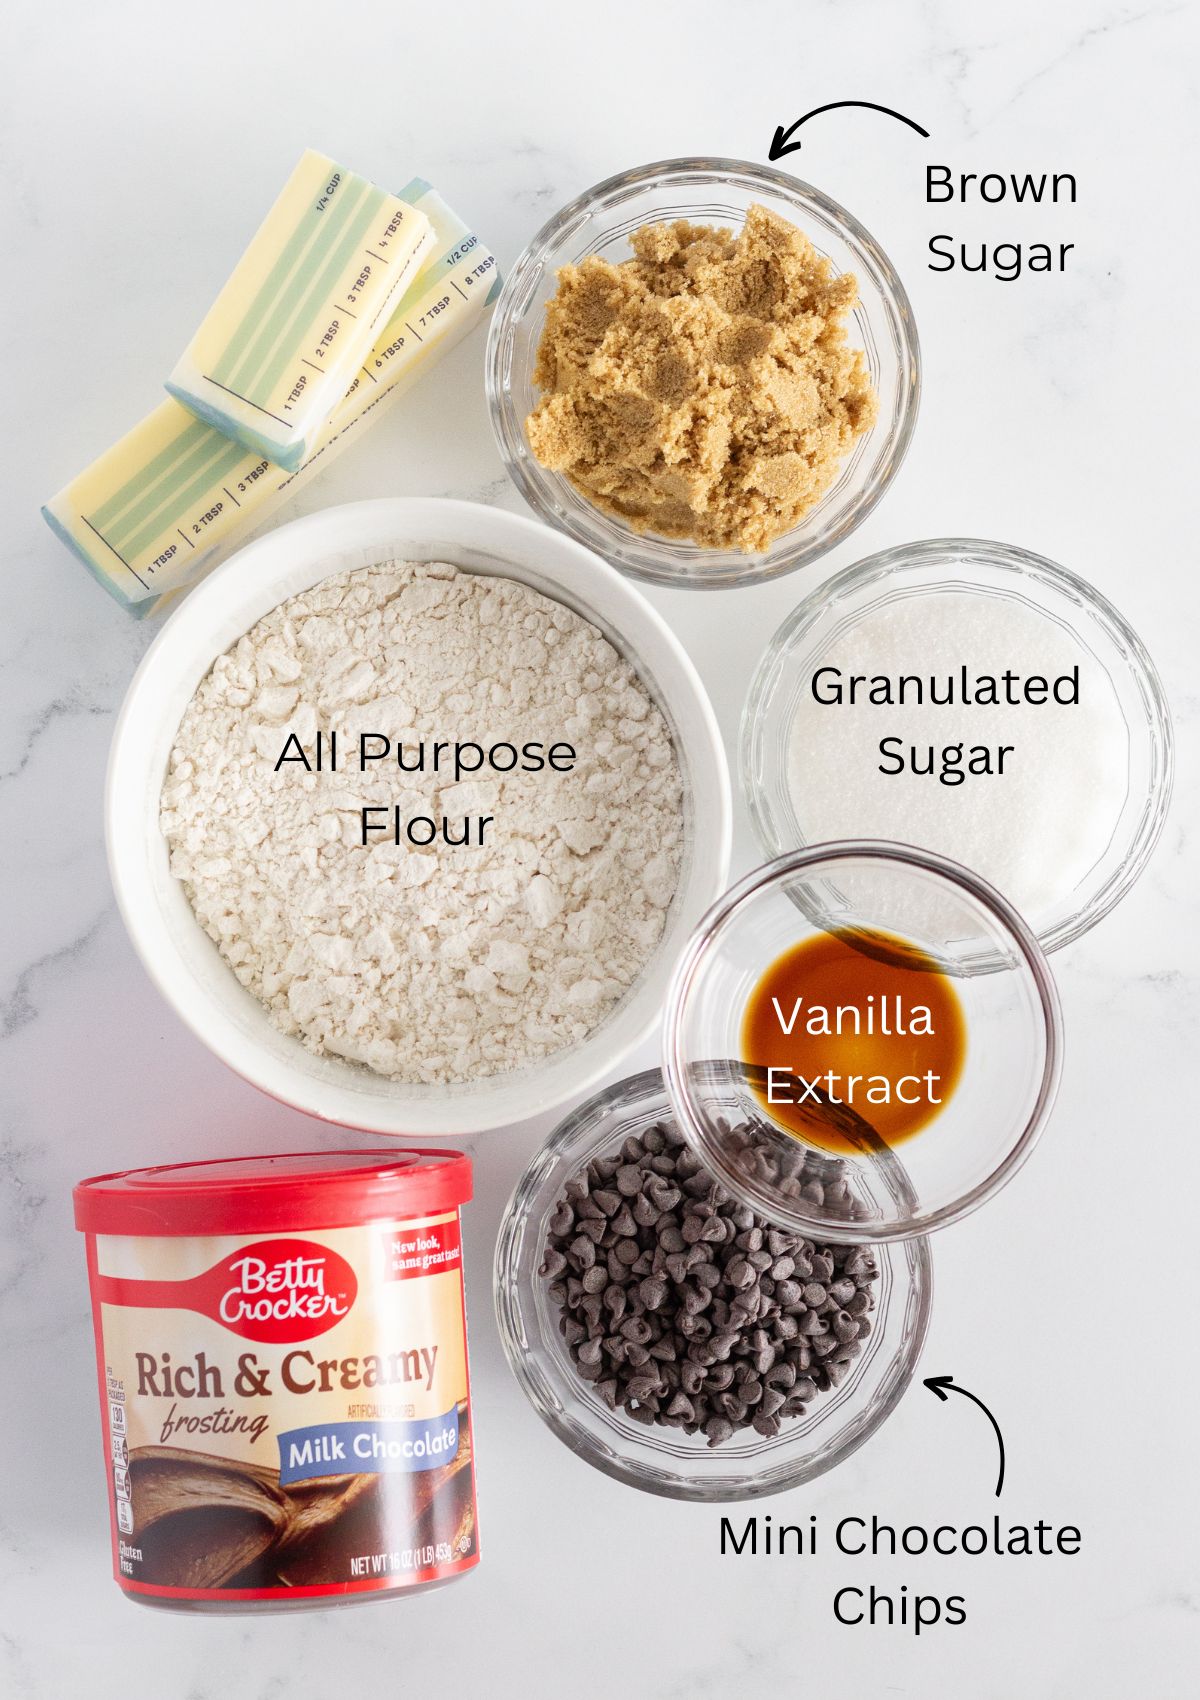 A photo of the ingredients needed to make the edible cookie dough portion of this recipe.